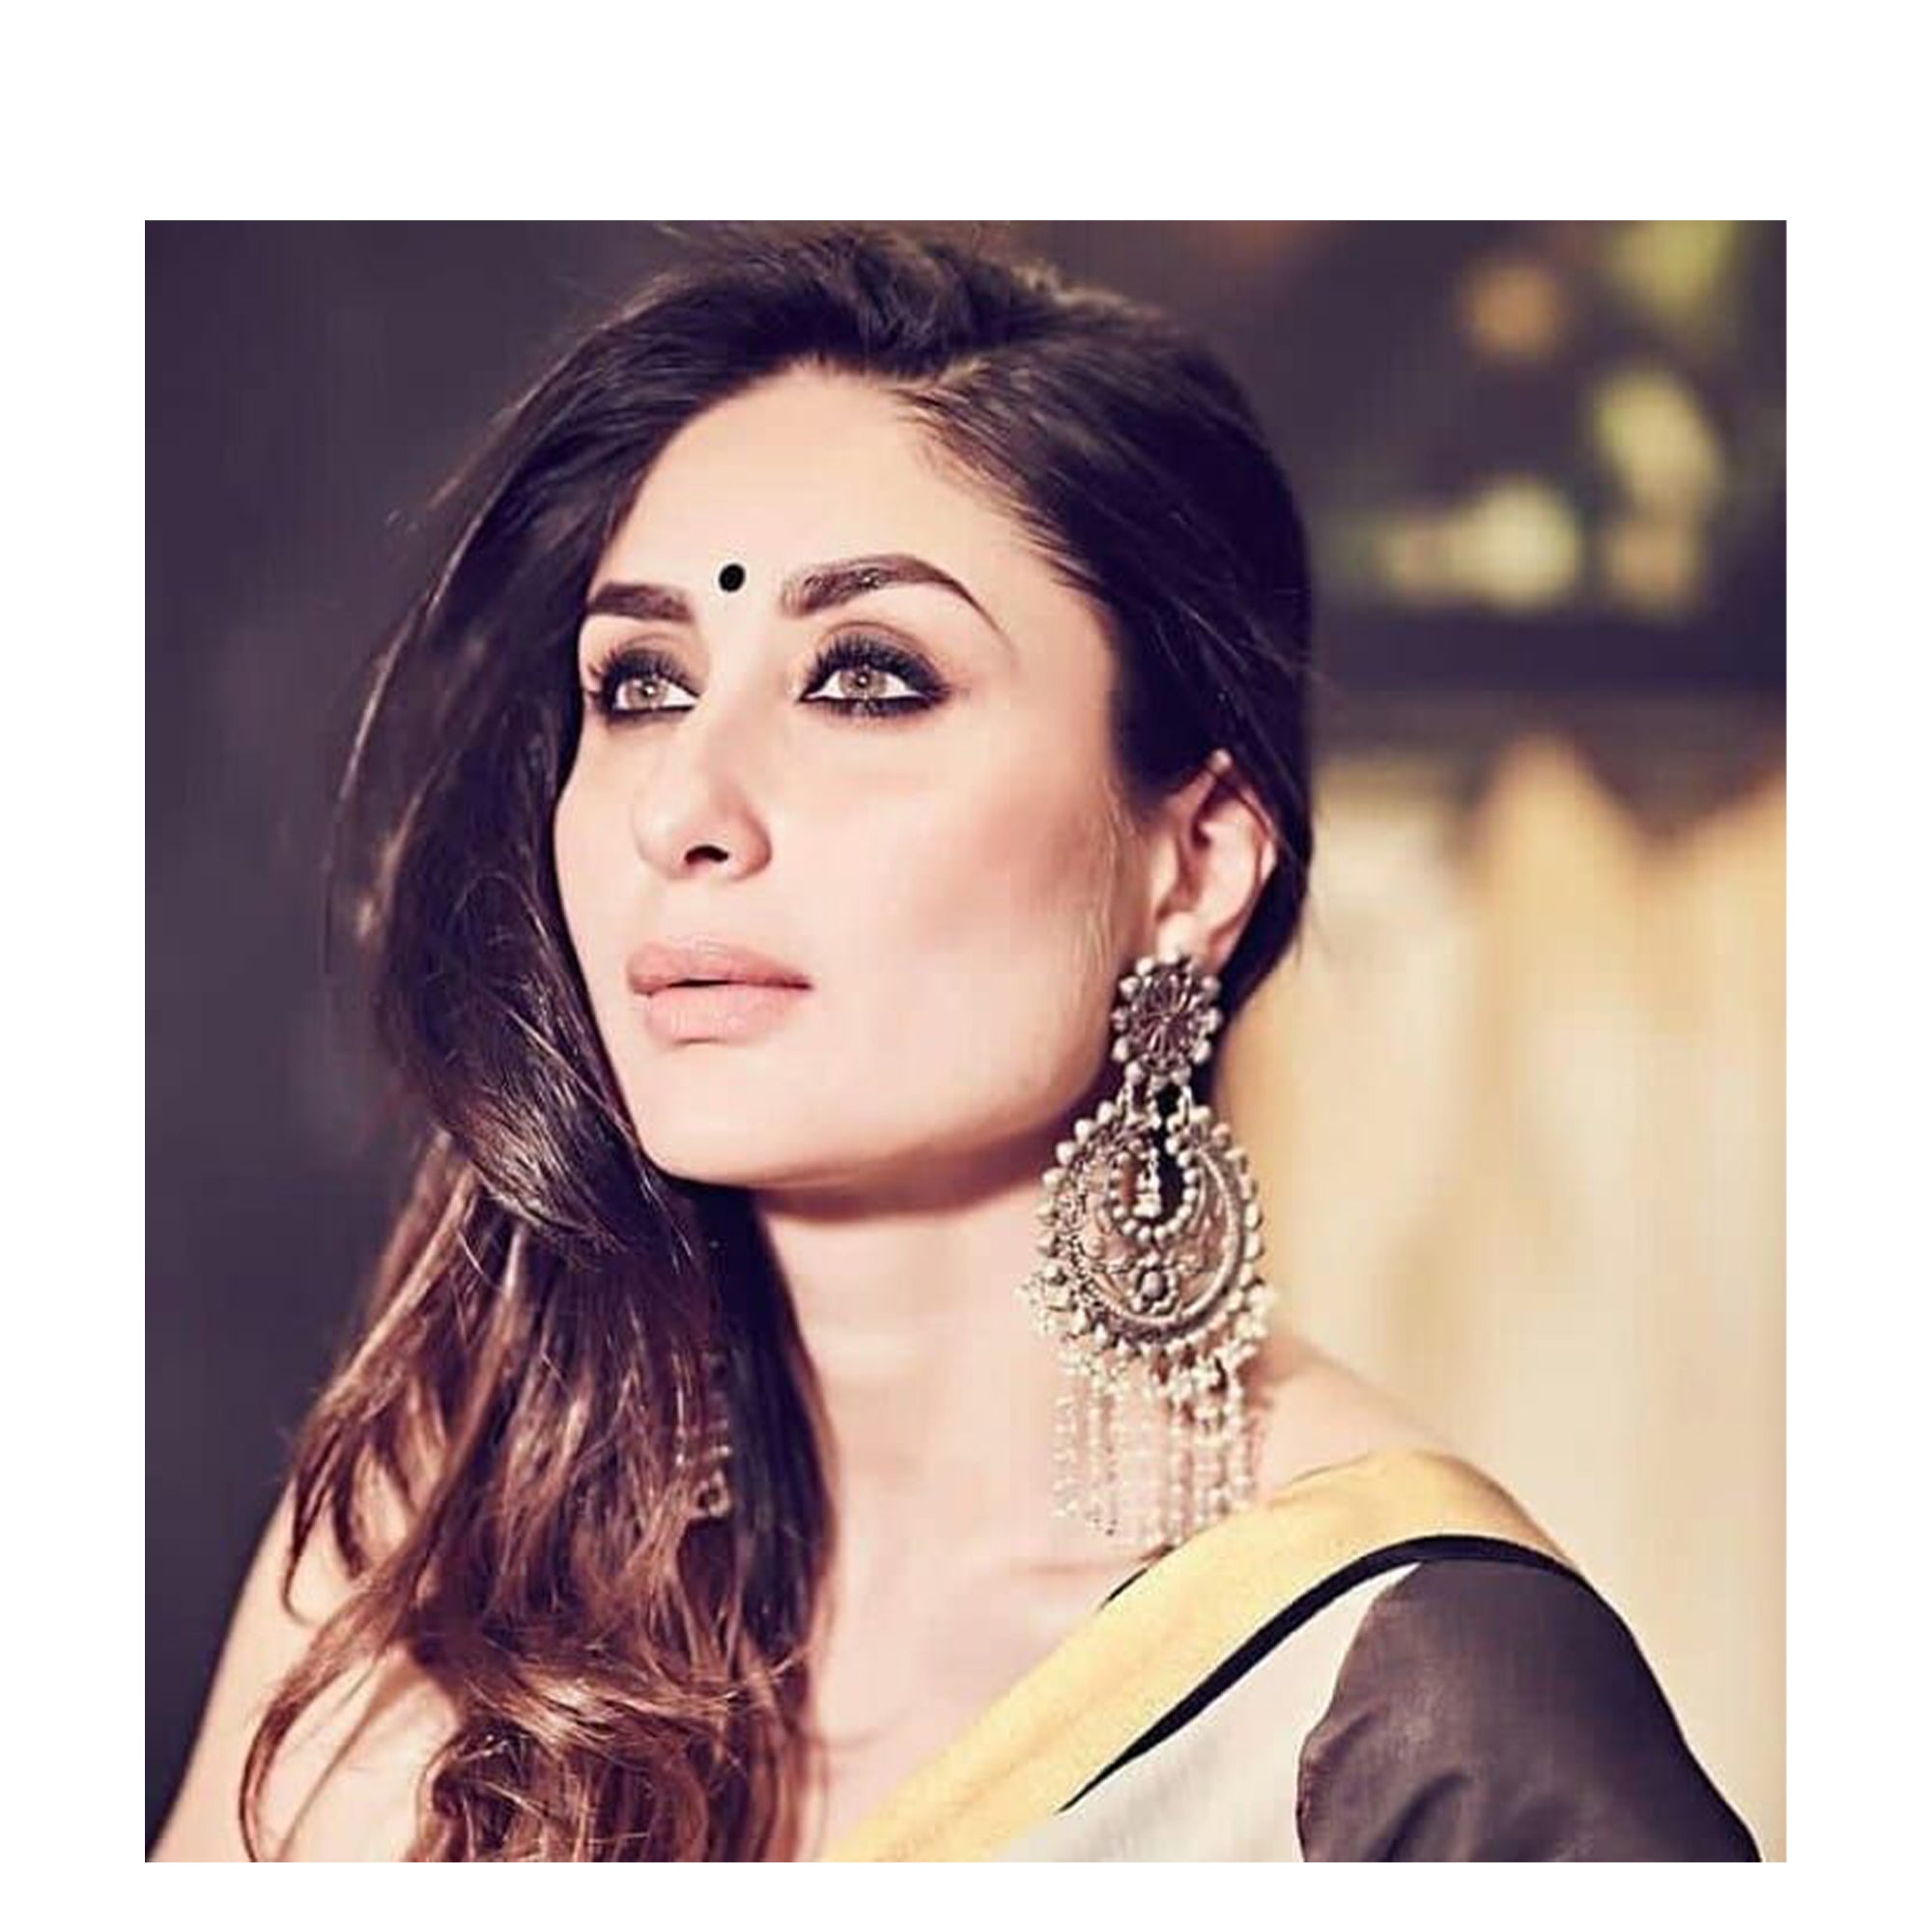 Kareena Kapoor Khan in Raj Mahtani's Columbian emerald and diamond classic  earrings paired with an exquisite diamond bracelet. Styled by… | Instagram